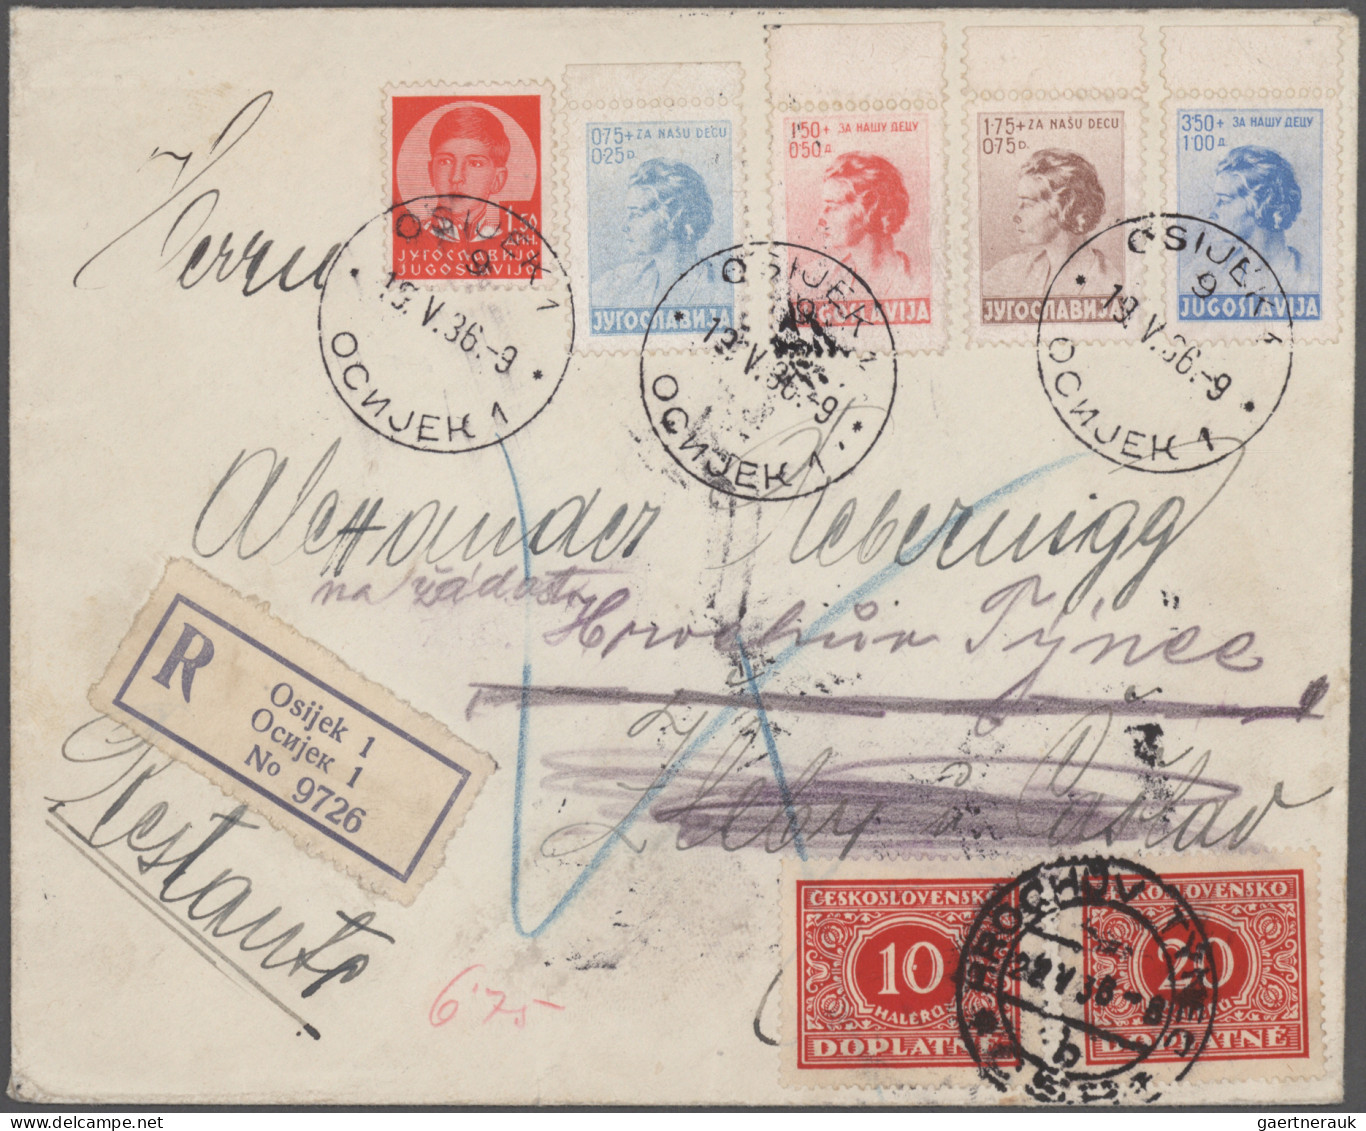 Yugoslavia: 1921/1986, balance of apprx. 150 covers/cards from some Kingdom of Y